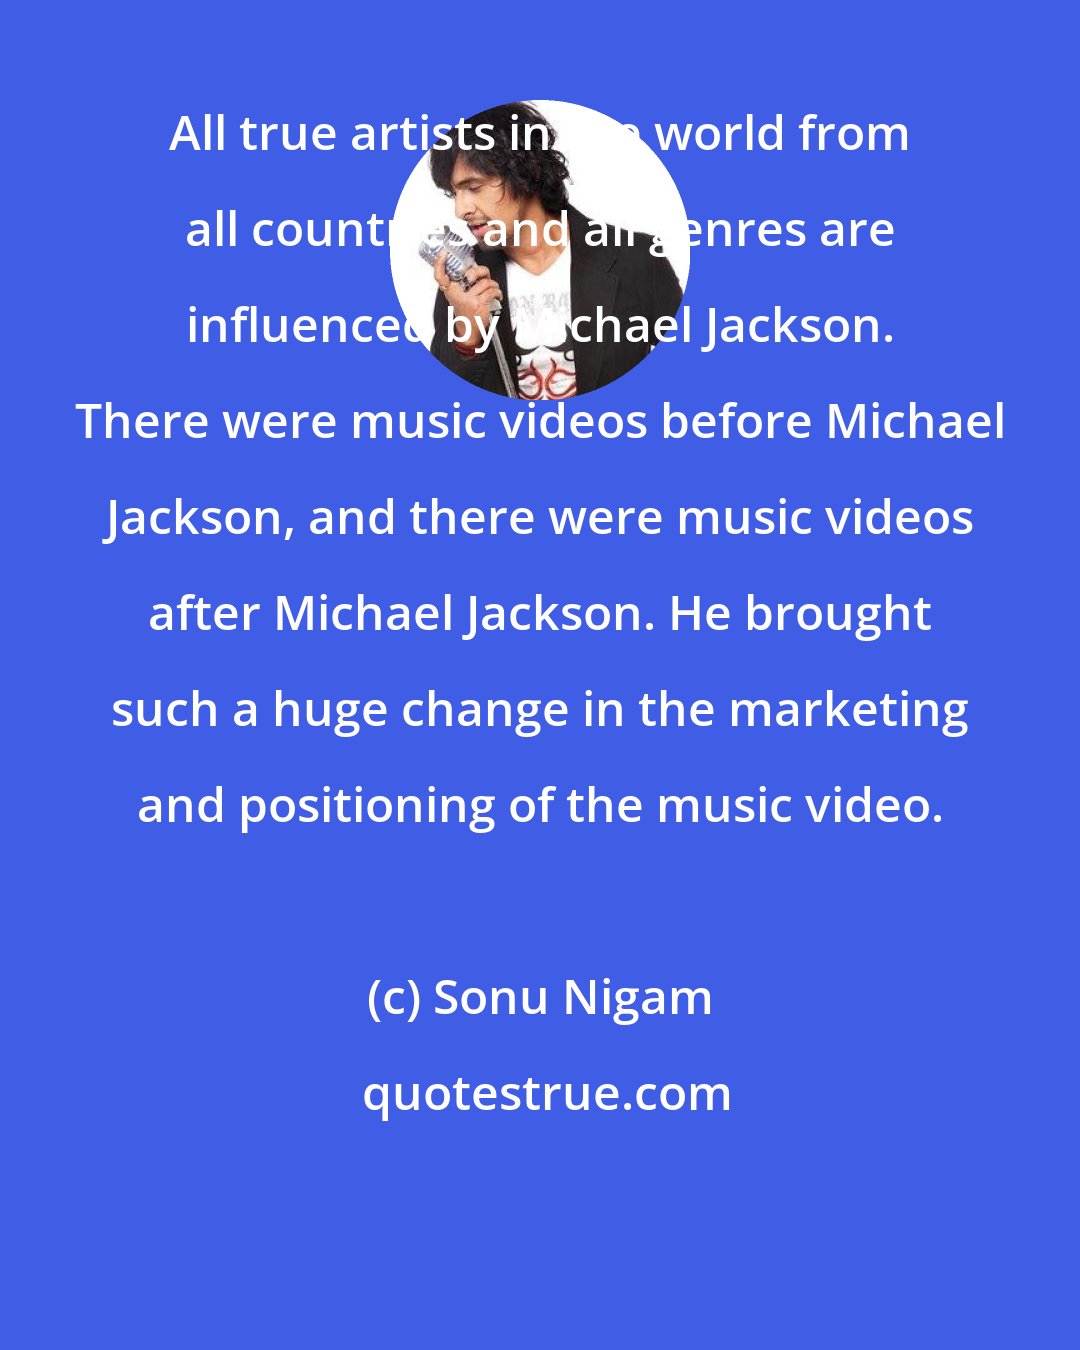 Sonu Nigam: All true artists in the world from all countries and all genres are influenced by Michael Jackson. There were music videos before Michael Jackson, and there were music videos after Michael Jackson. He brought such a huge change in the marketing and positioning of the music video.